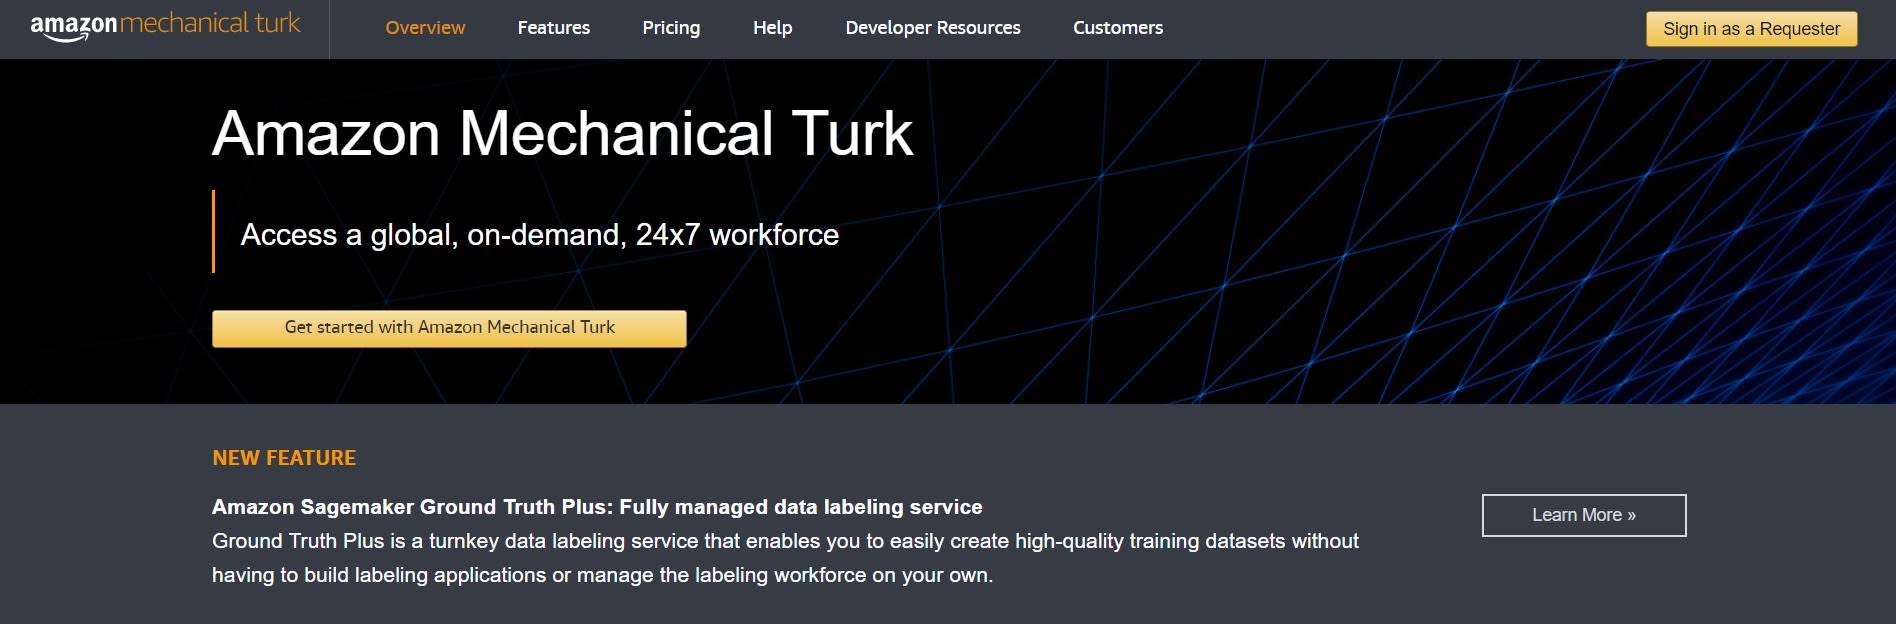 How to make money on Amazon with Mechanical Turk